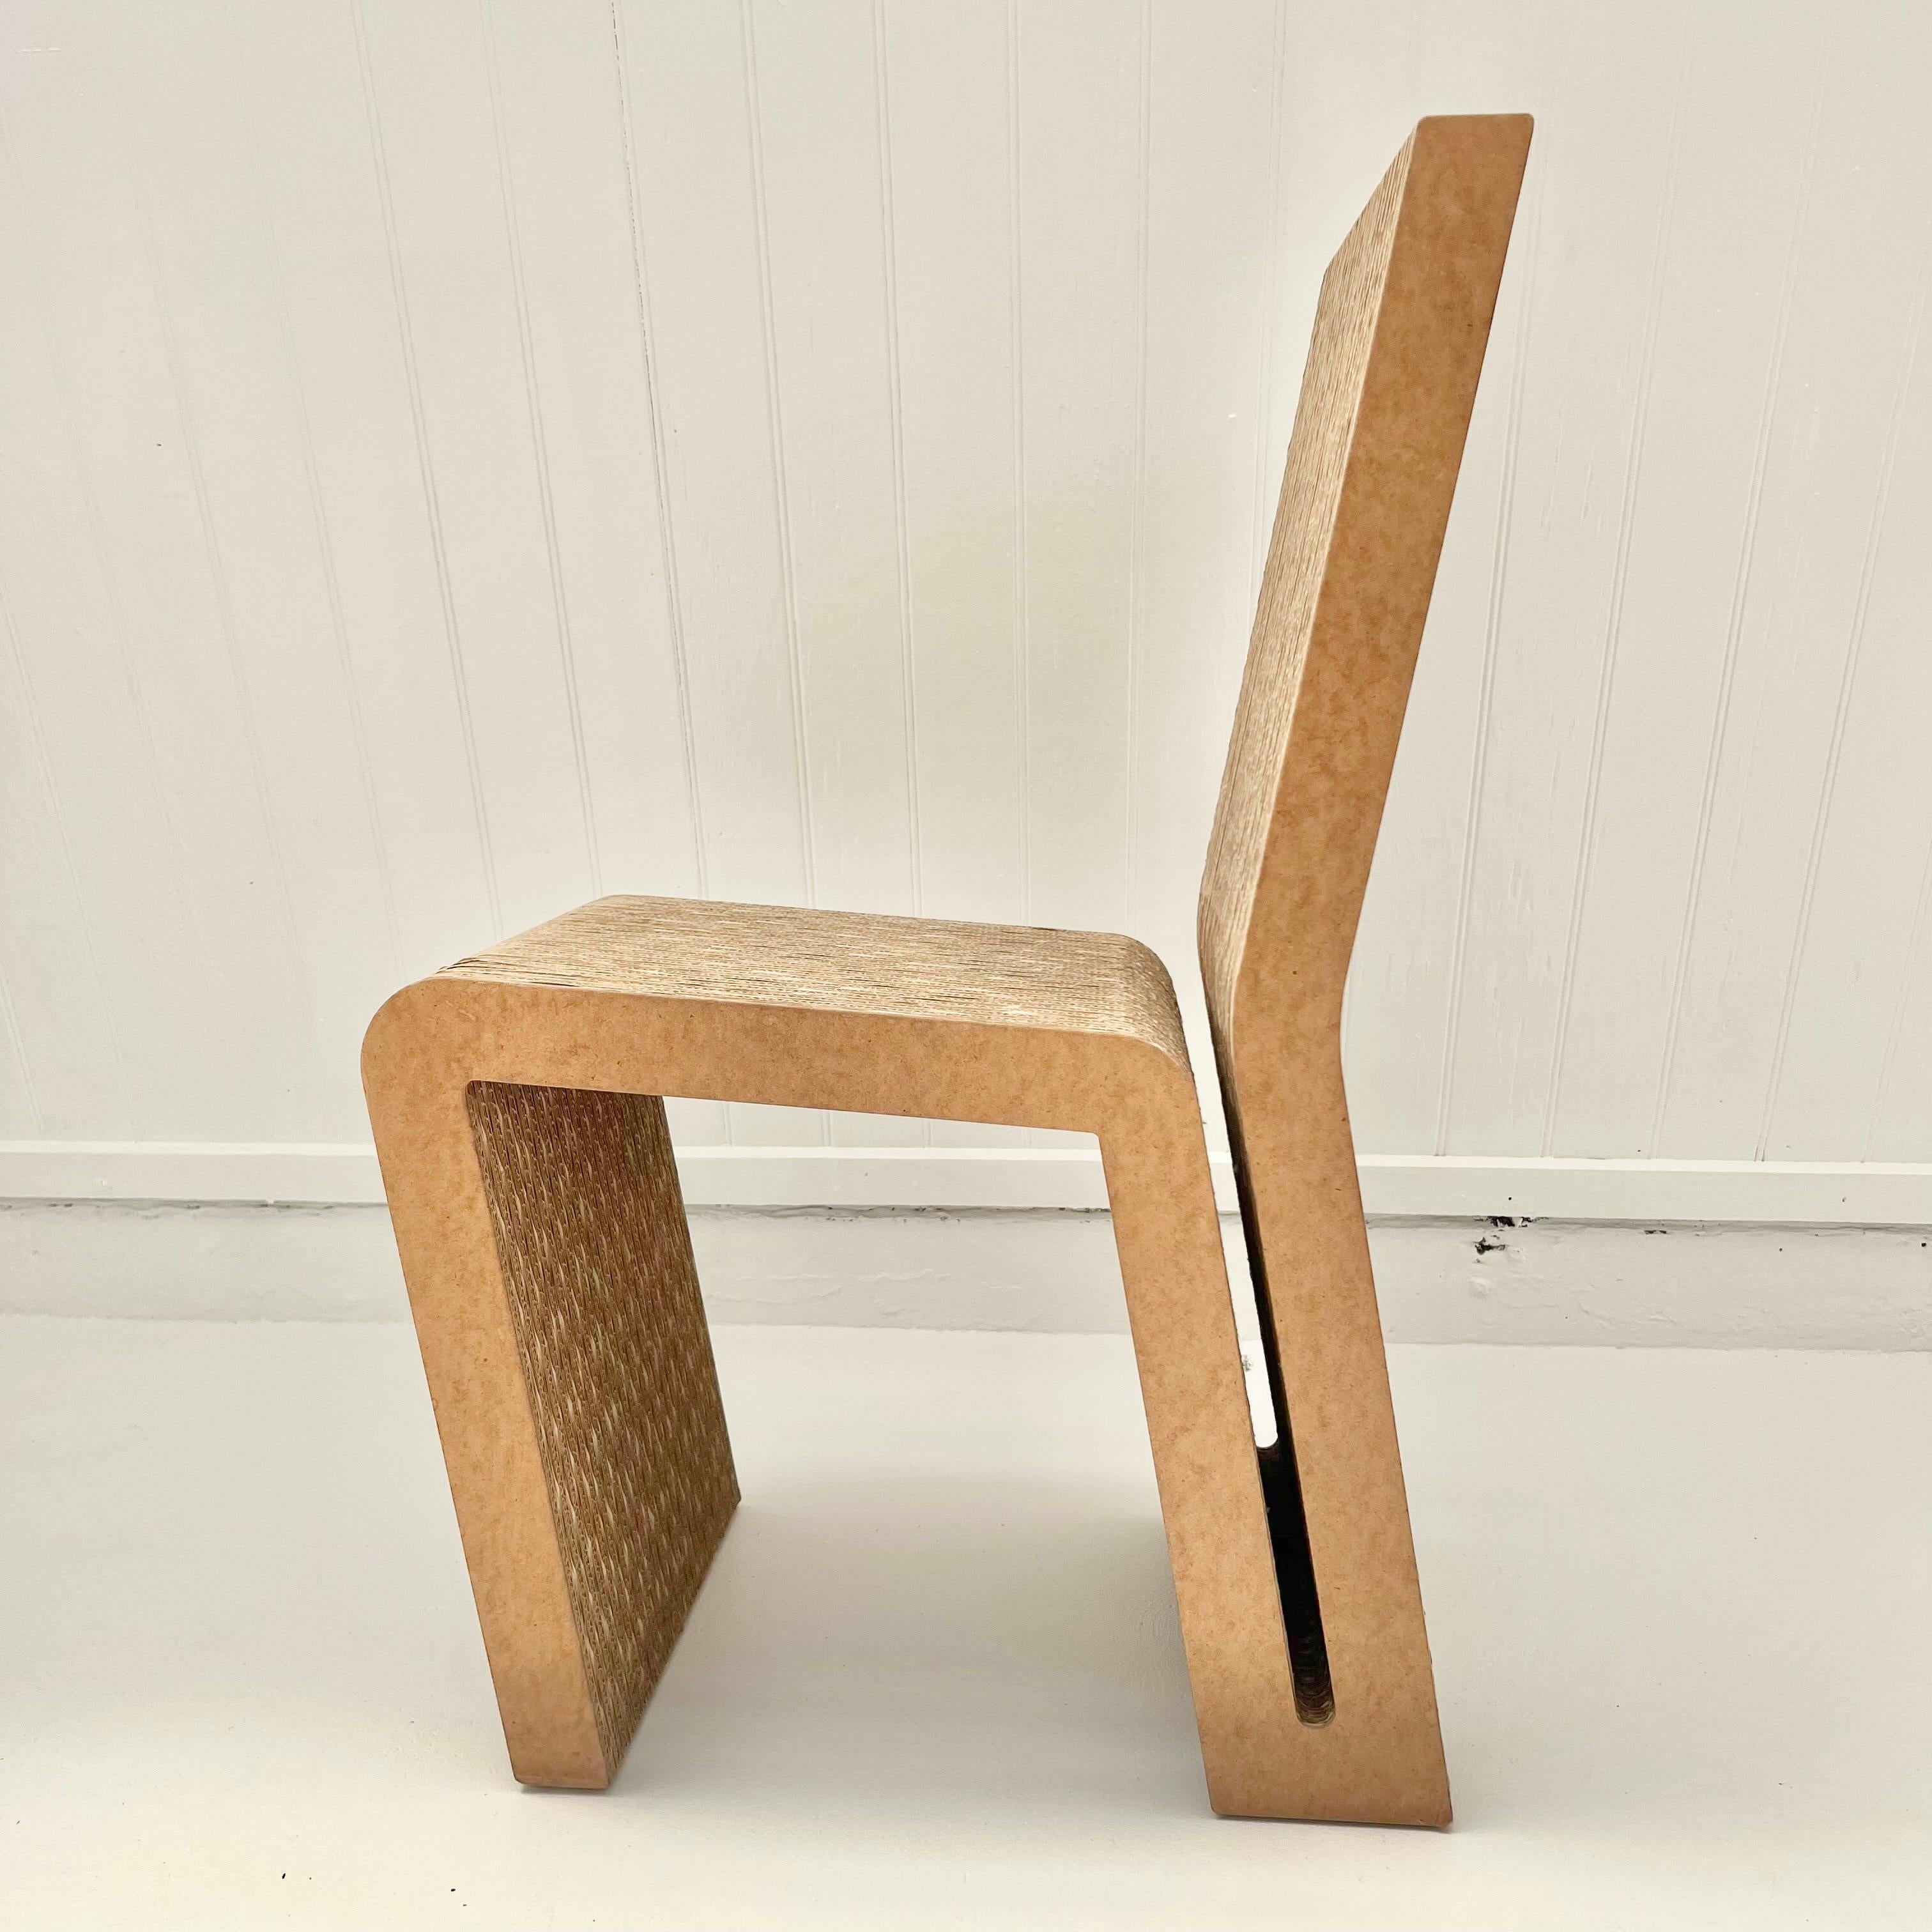 Rare experimental corrugated cardboard side chair from the 